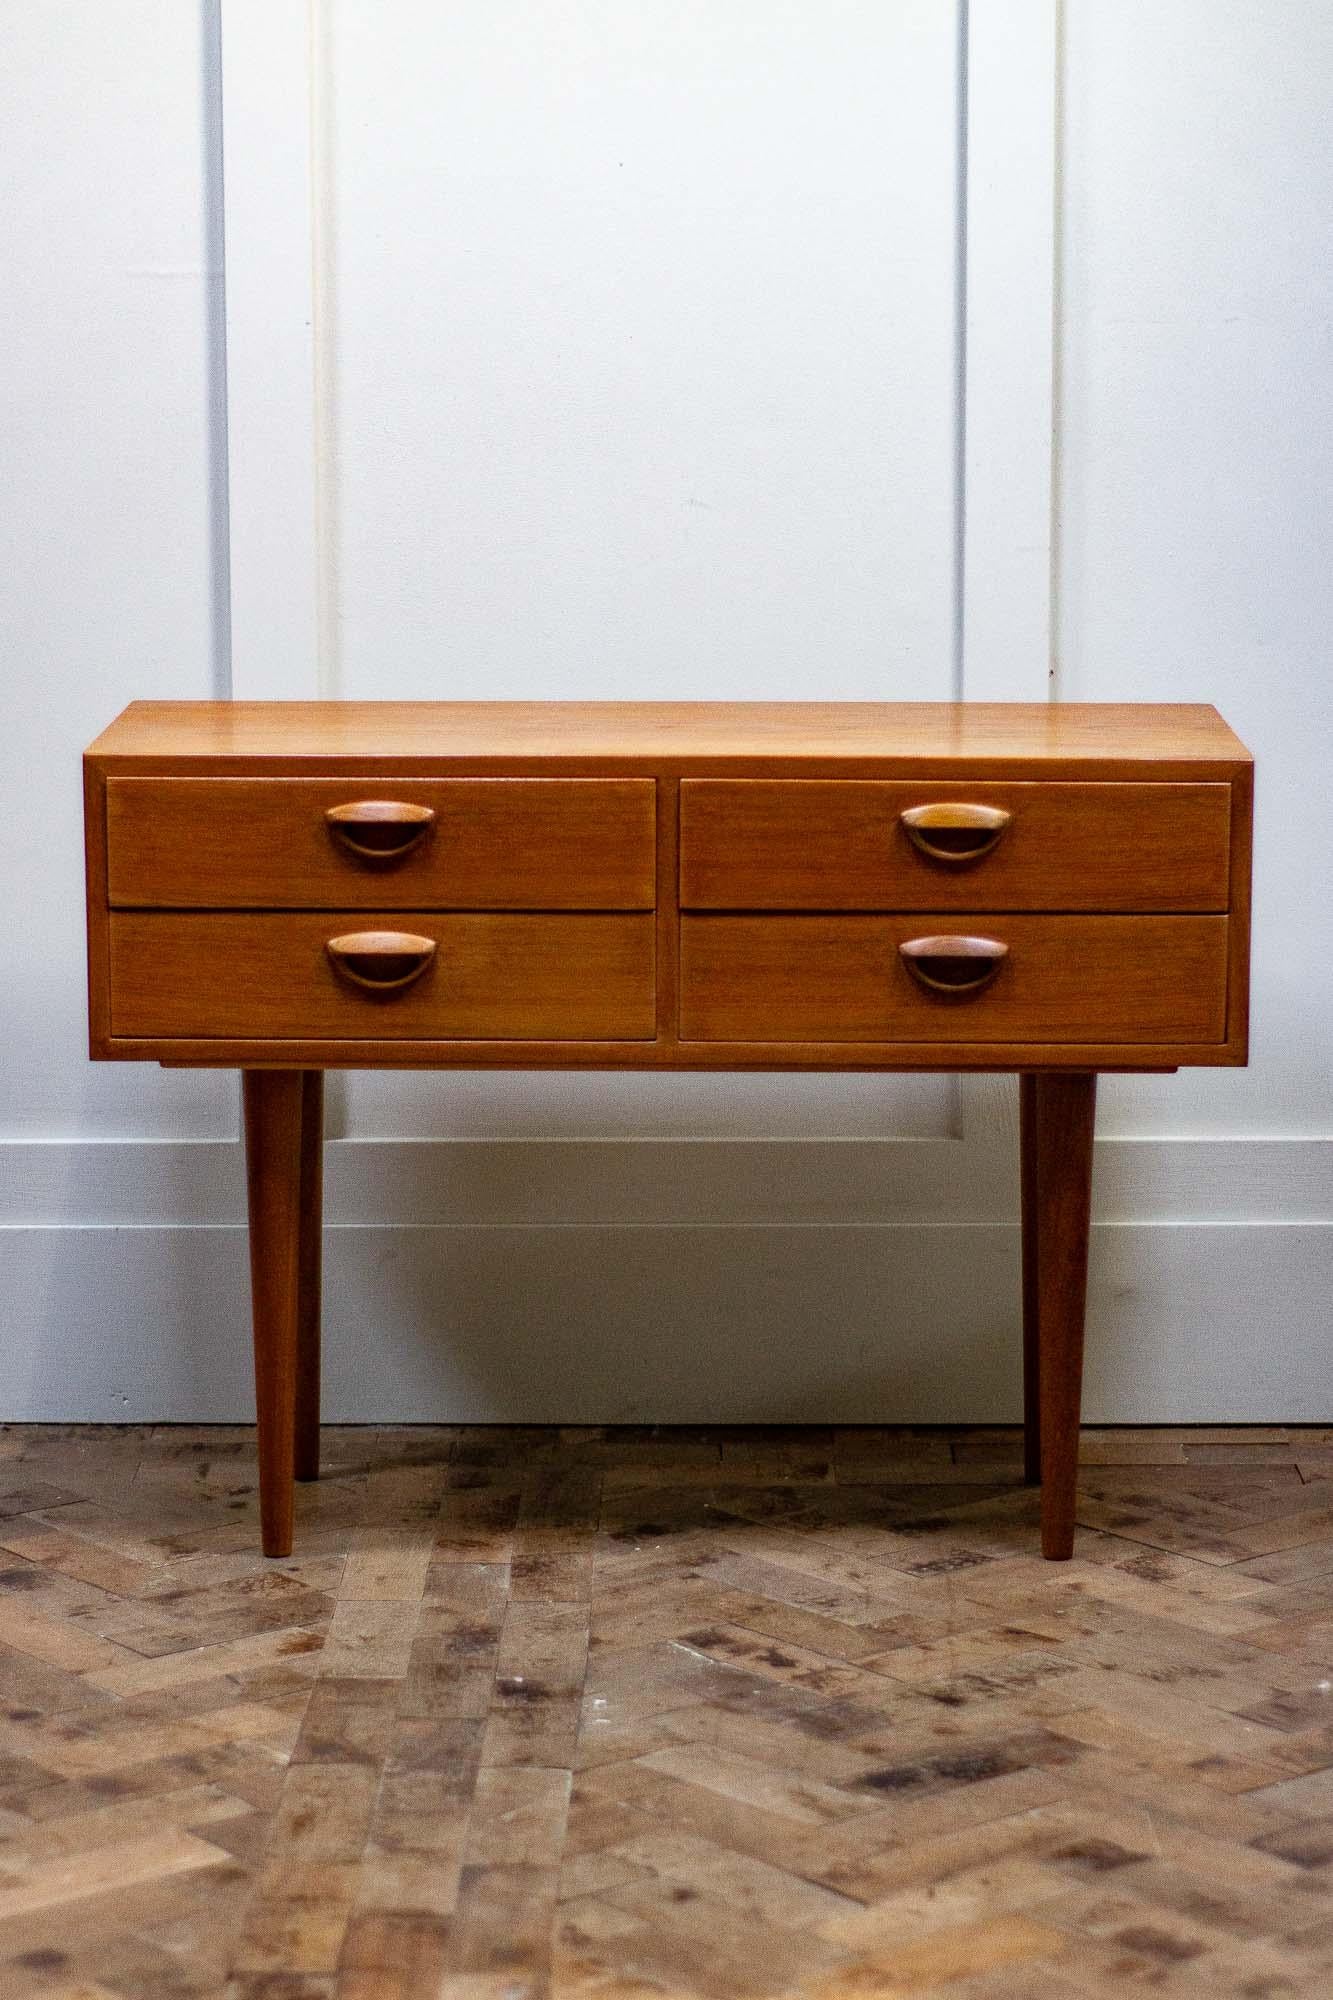 Teak chest of drawers or console designed by Kai Kristiansen in the early 1960s for Feldballes Mobelfrabrik in Denmark.

The unit is very well made with his own design of eyelid handles, Solid teak legs and dovetail joints on the